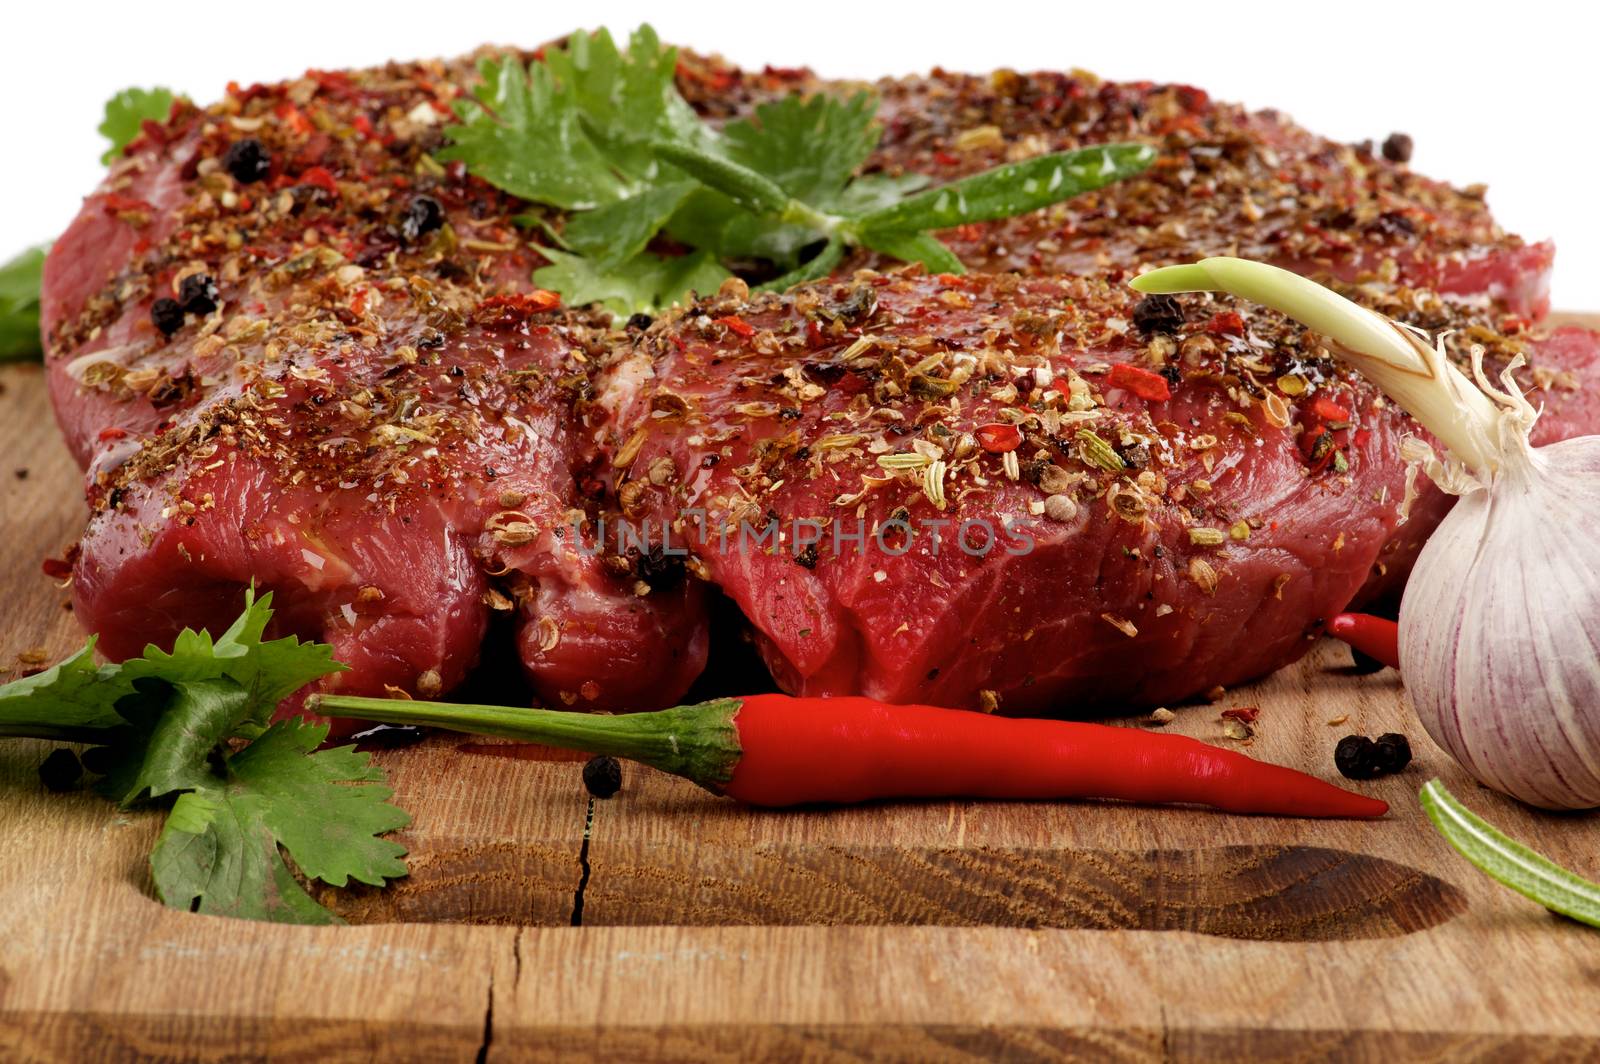 Marinated Raw Beef Steak with Herbs and Spices, Garlic and Chili Pepper closeup on Wooden Cutting Board on White background